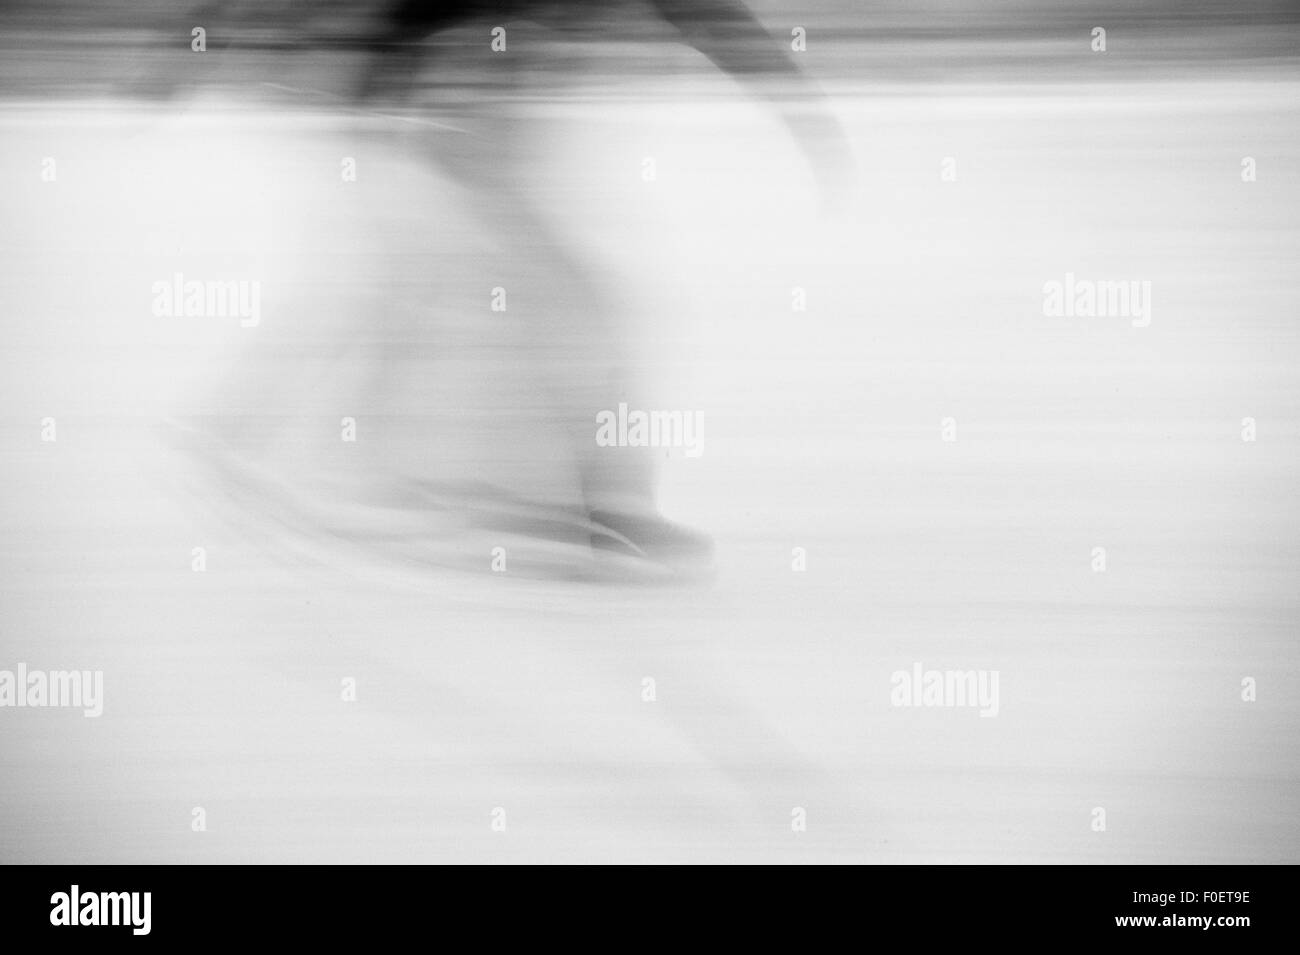 Side view of adult man ice skating in park. Blurred image showing speed and movement. Stock Photo